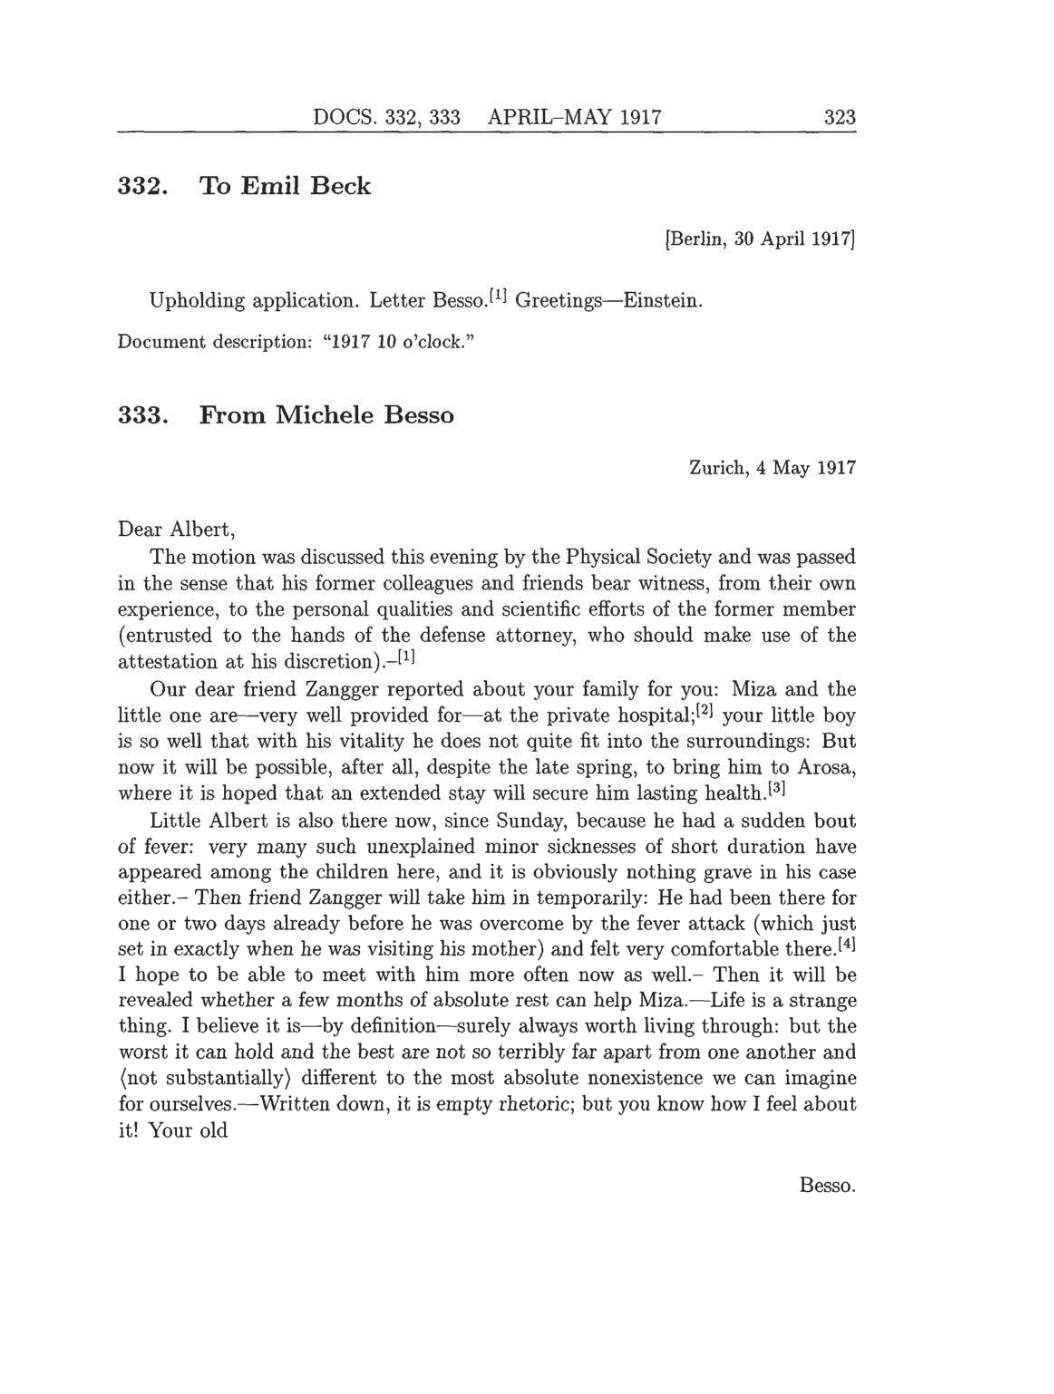 Volume 8: The Berlin Years: Correspondence, 1914-1918 (English translation supplement) page 323